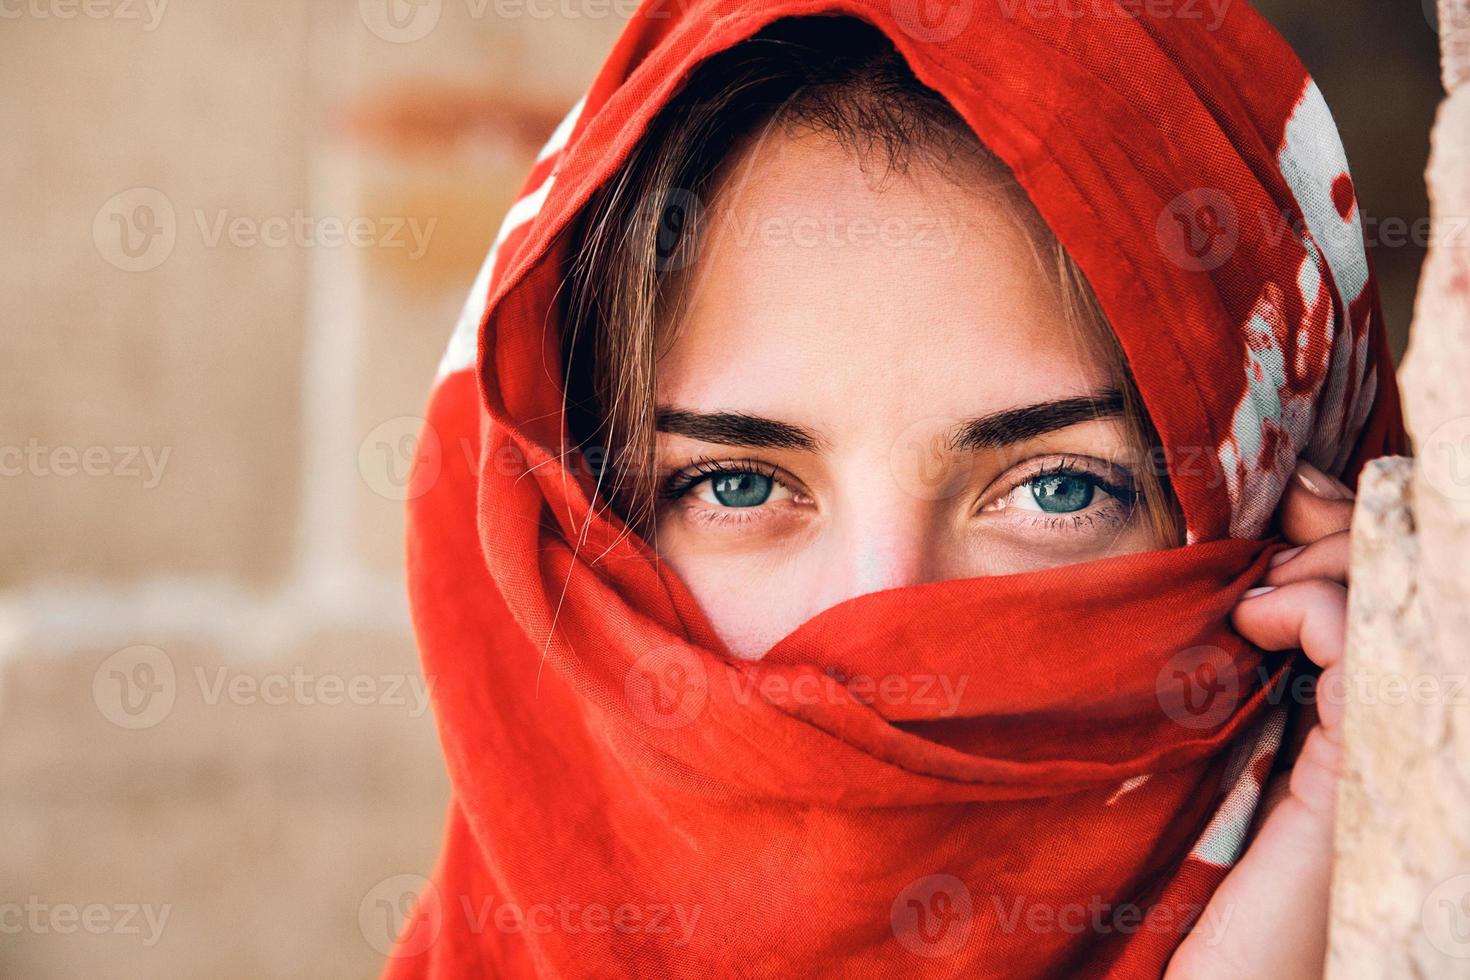 Woman with blue eyes in traditional Islamic cloth photo